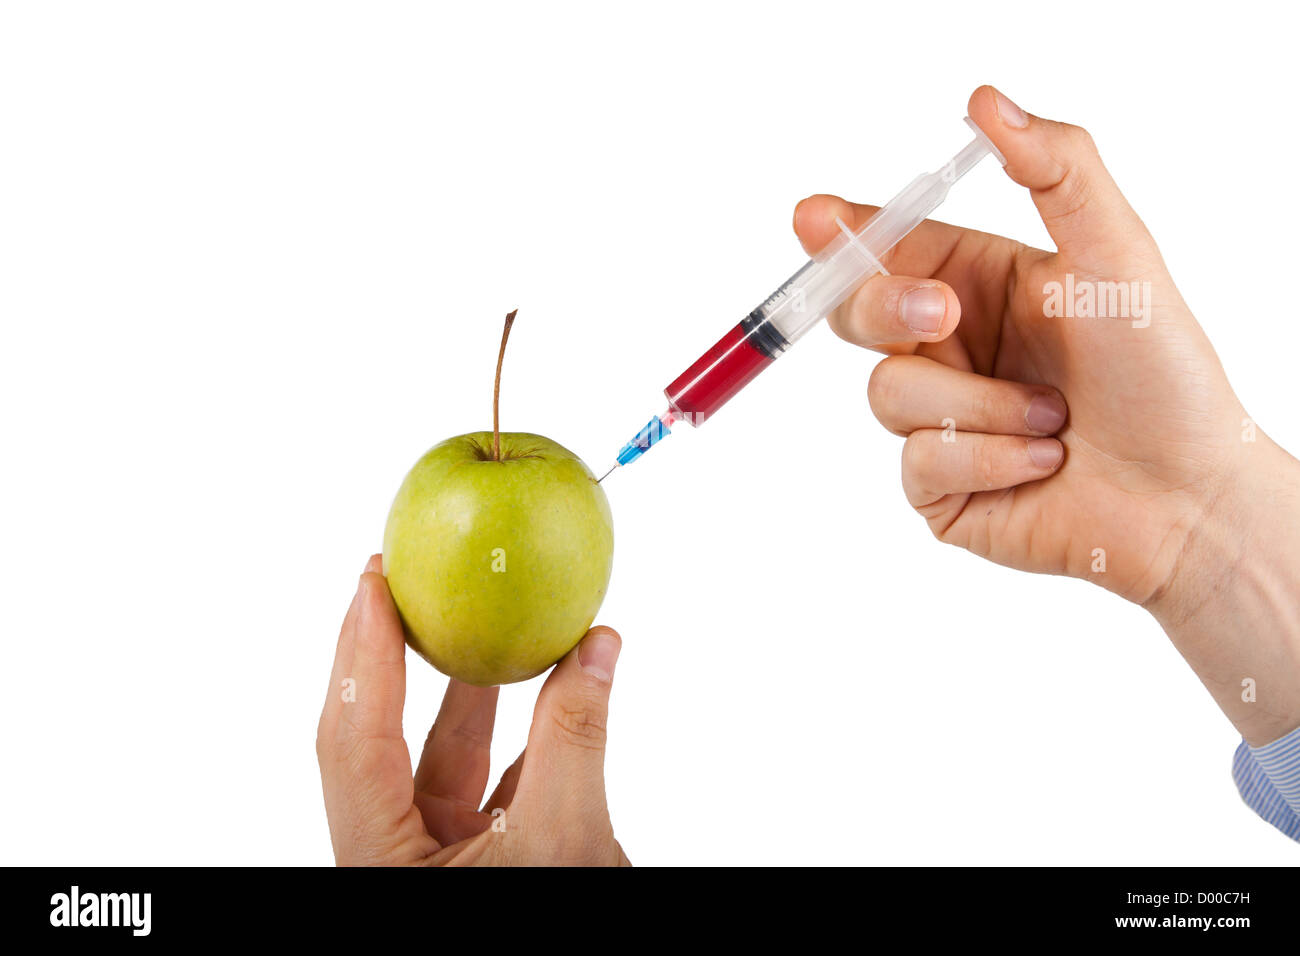 Man's hand injecting granny smith apple against white background Stock Photo